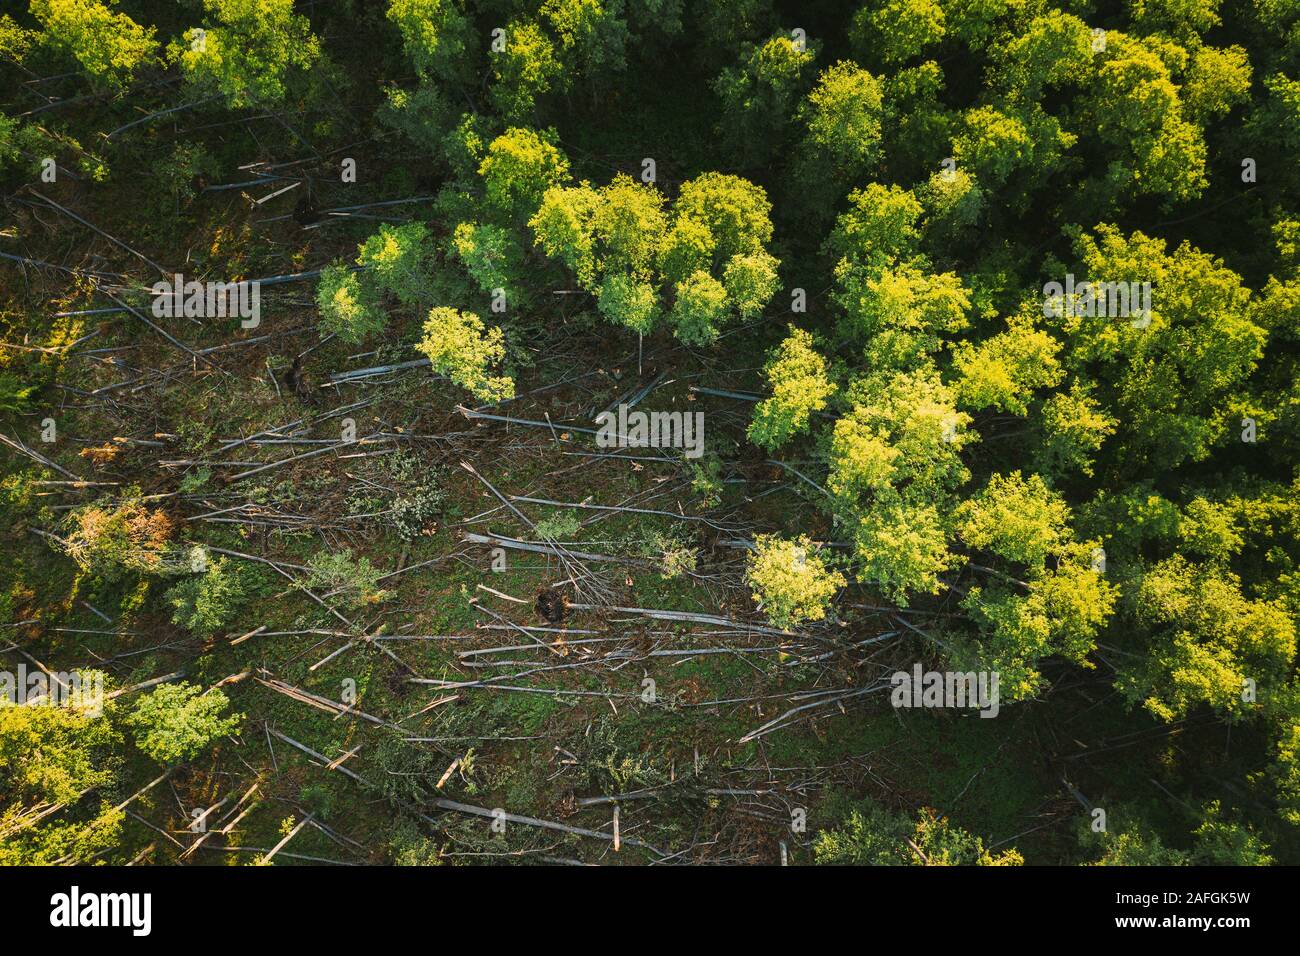 Aerial View Green Forest Deforestation Area Landscape. Top View Of Fallen Woods Trunks And Growing Forest. European Nature From High Attitude In Summe Stock Photo